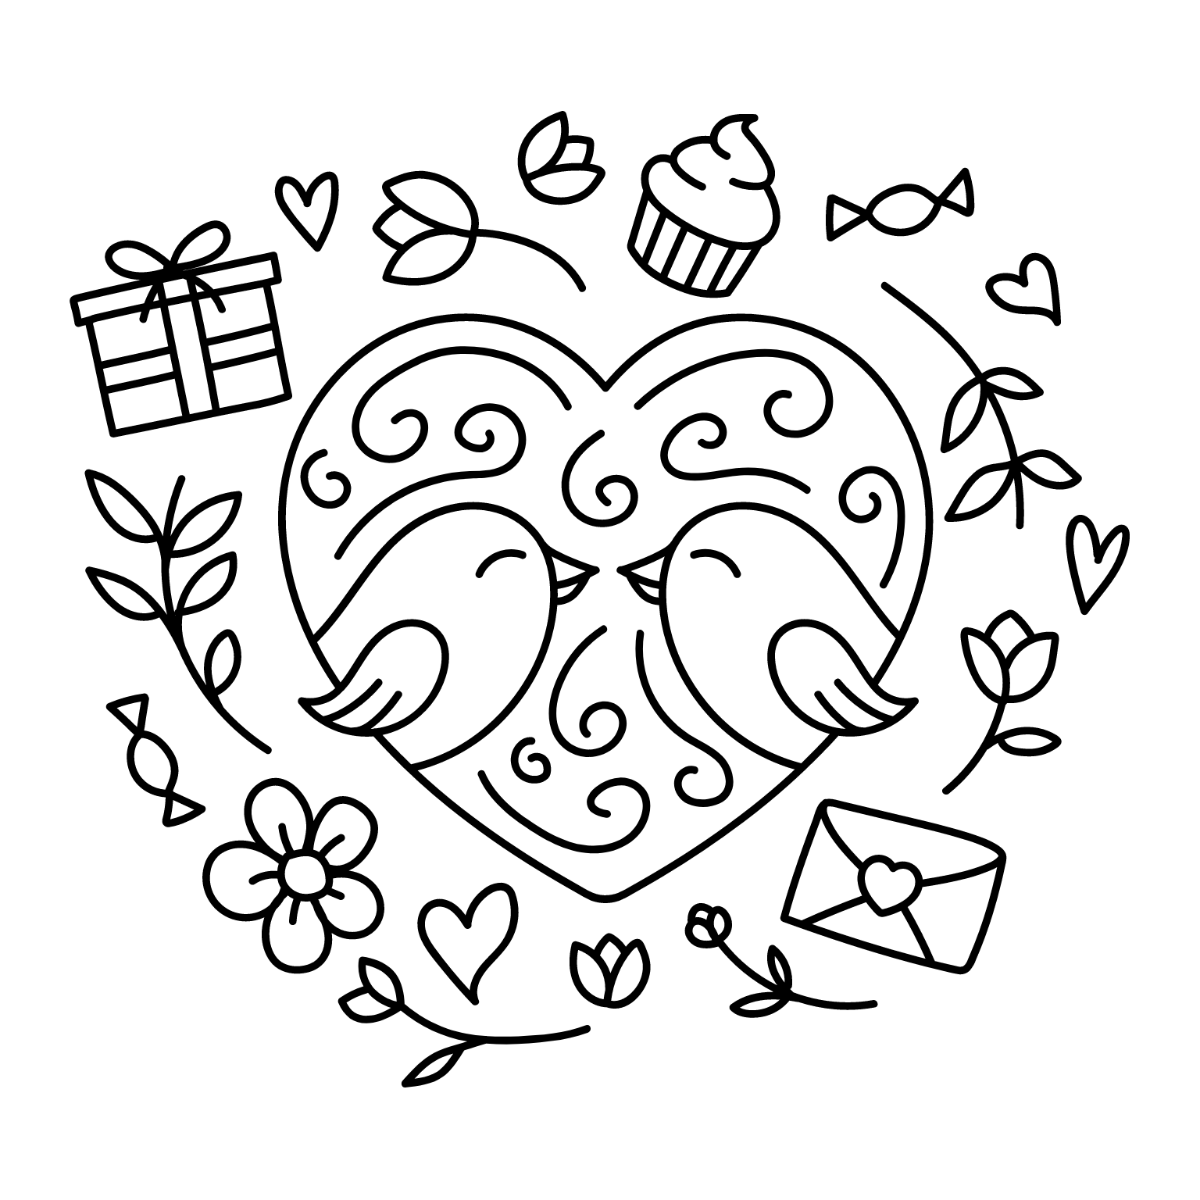 Free Love Doodle Vector Template